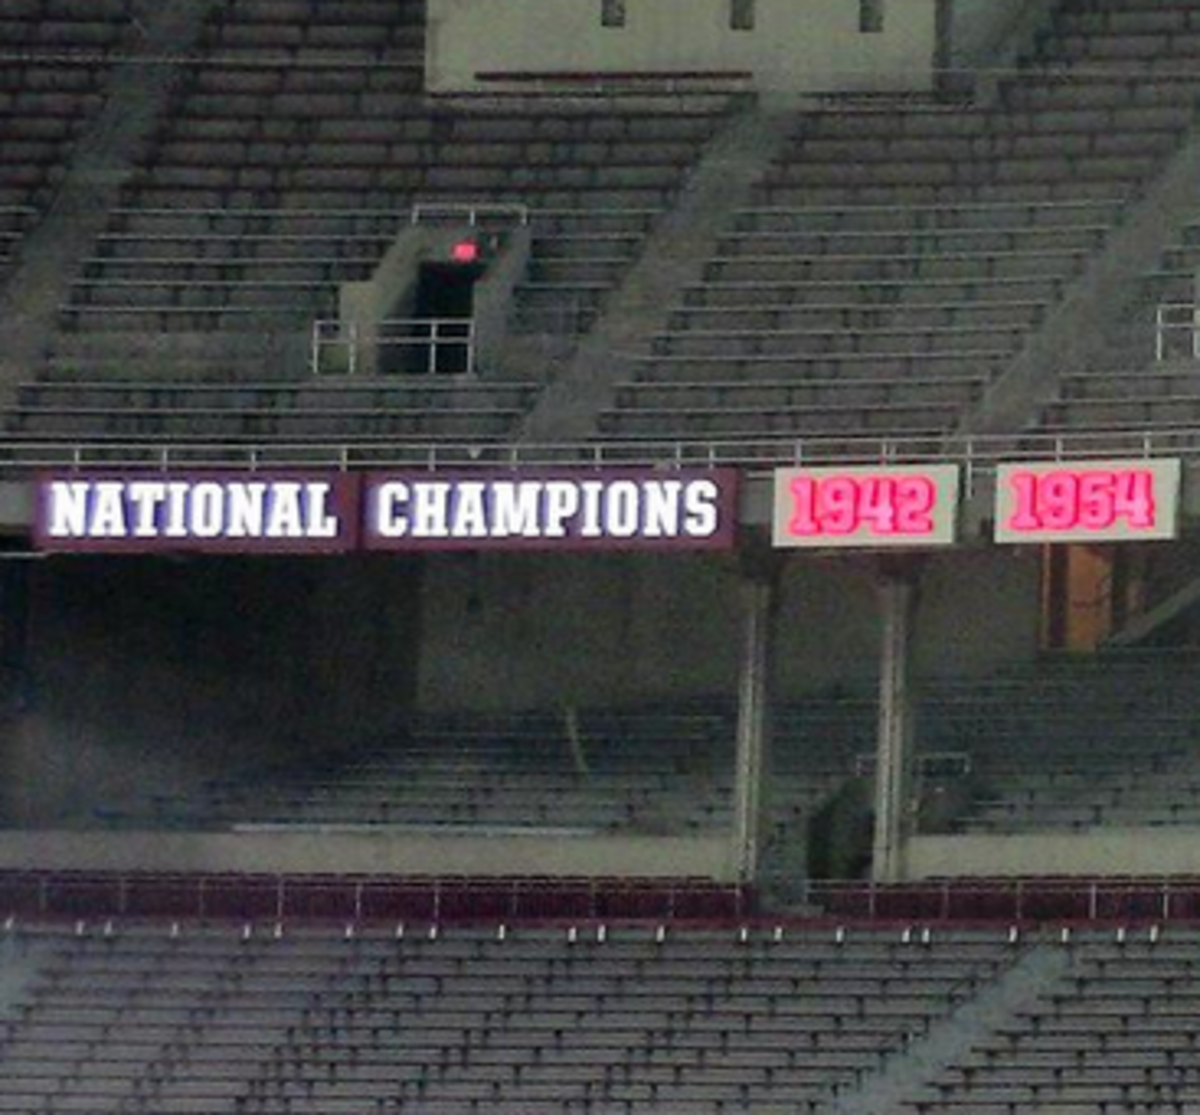 Ohio State National Championship banner lit up at their stadium.